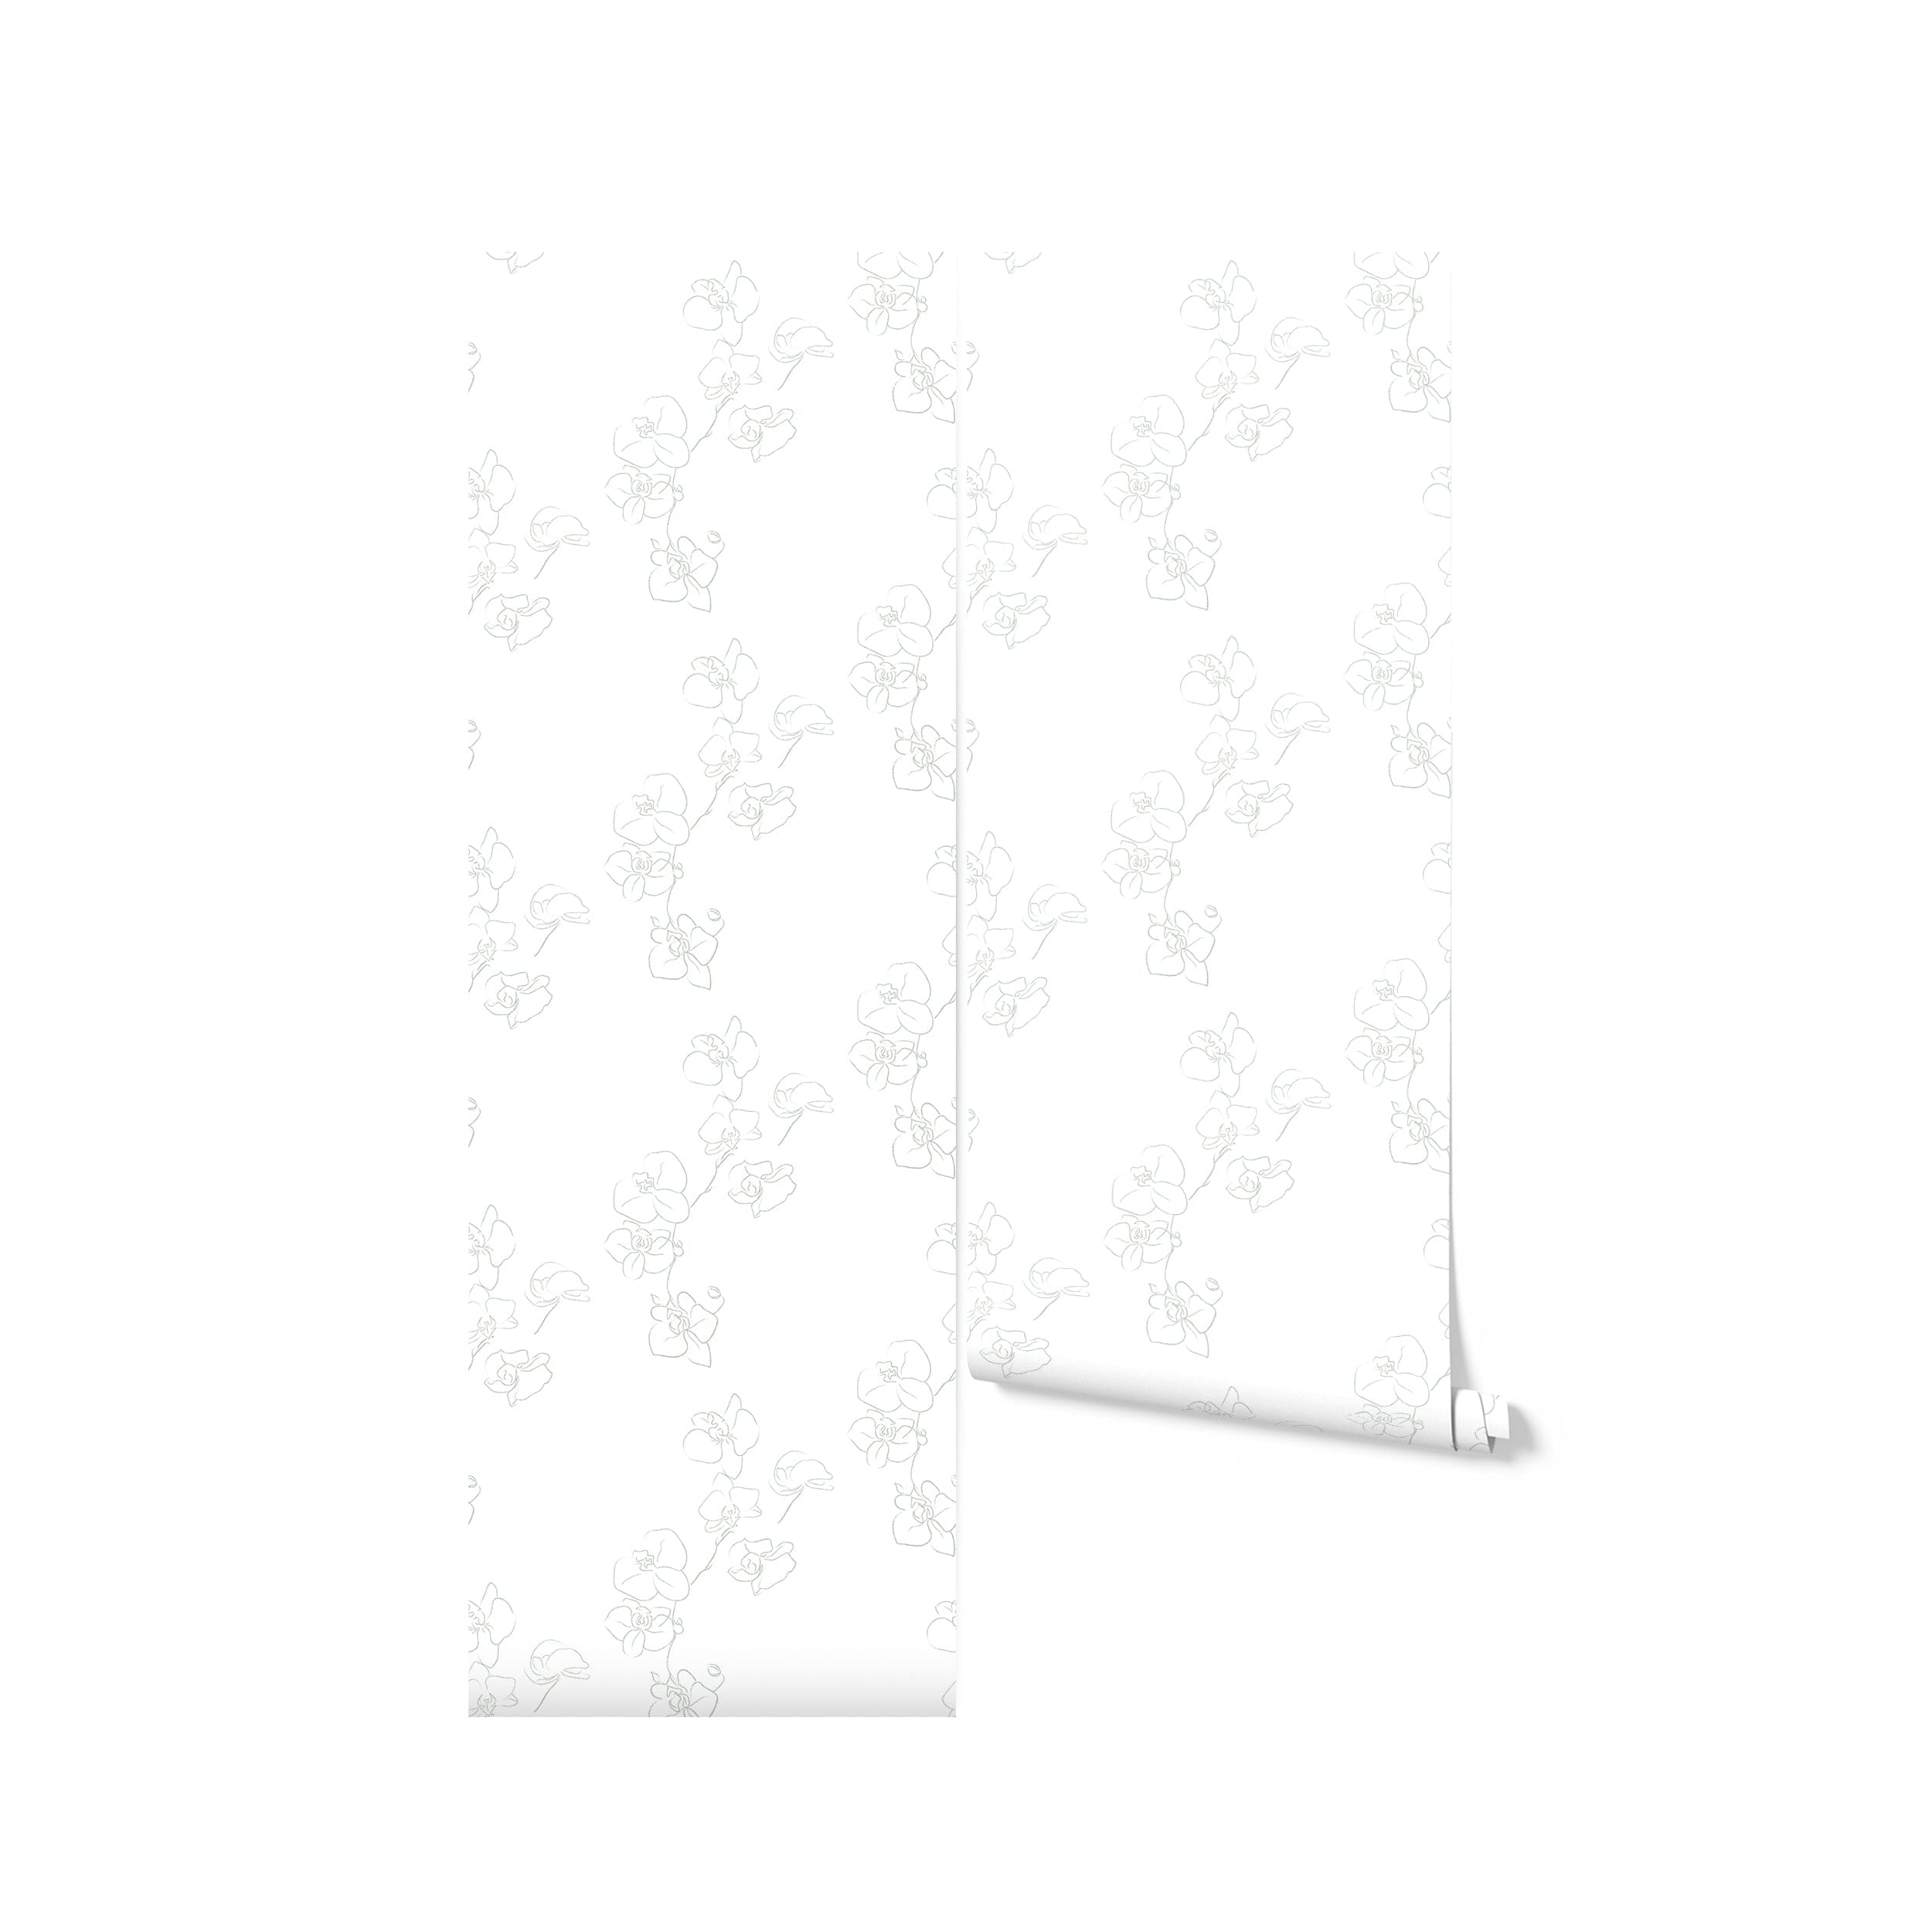 A roll of Floral Line Art Wallpaper unfurled slightly to reveal the elegant, continuous-line sketched floral pattern on a pure white backdrop